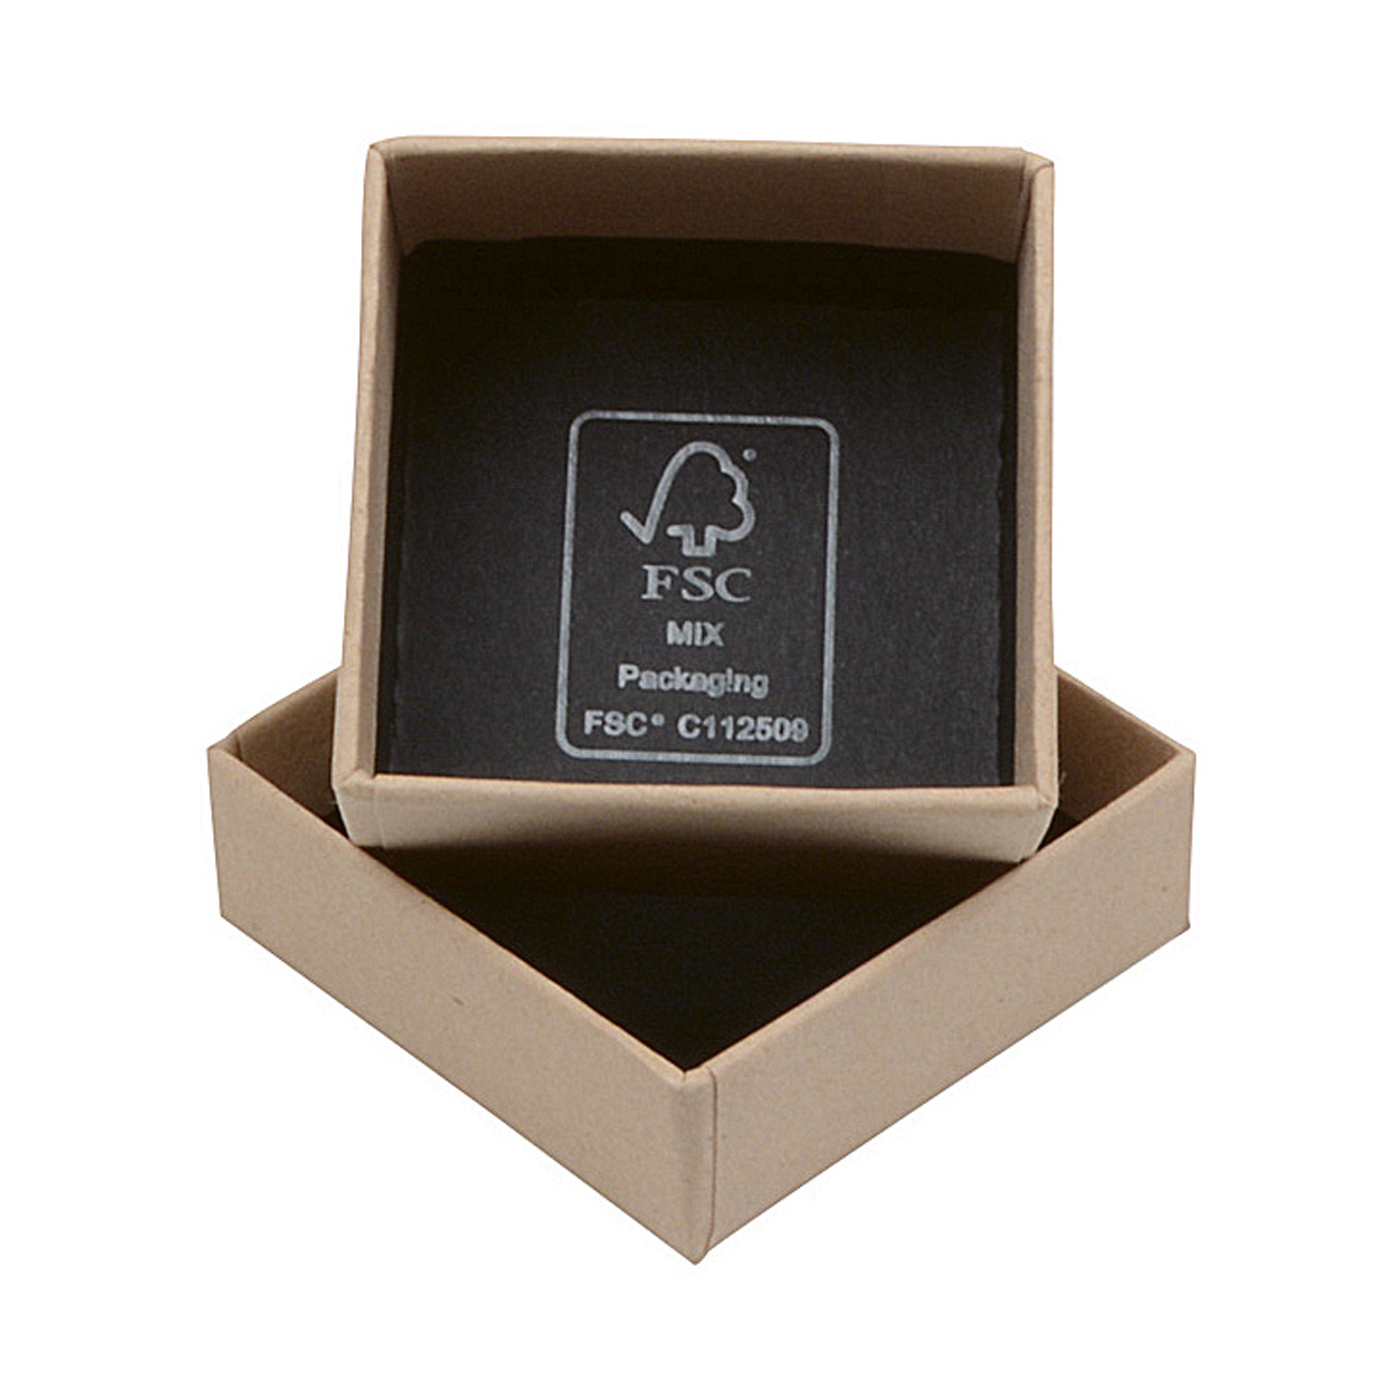 Jewellery Packaging "Eco", Natural, 65 x 65 x 25 mm - 1 piece